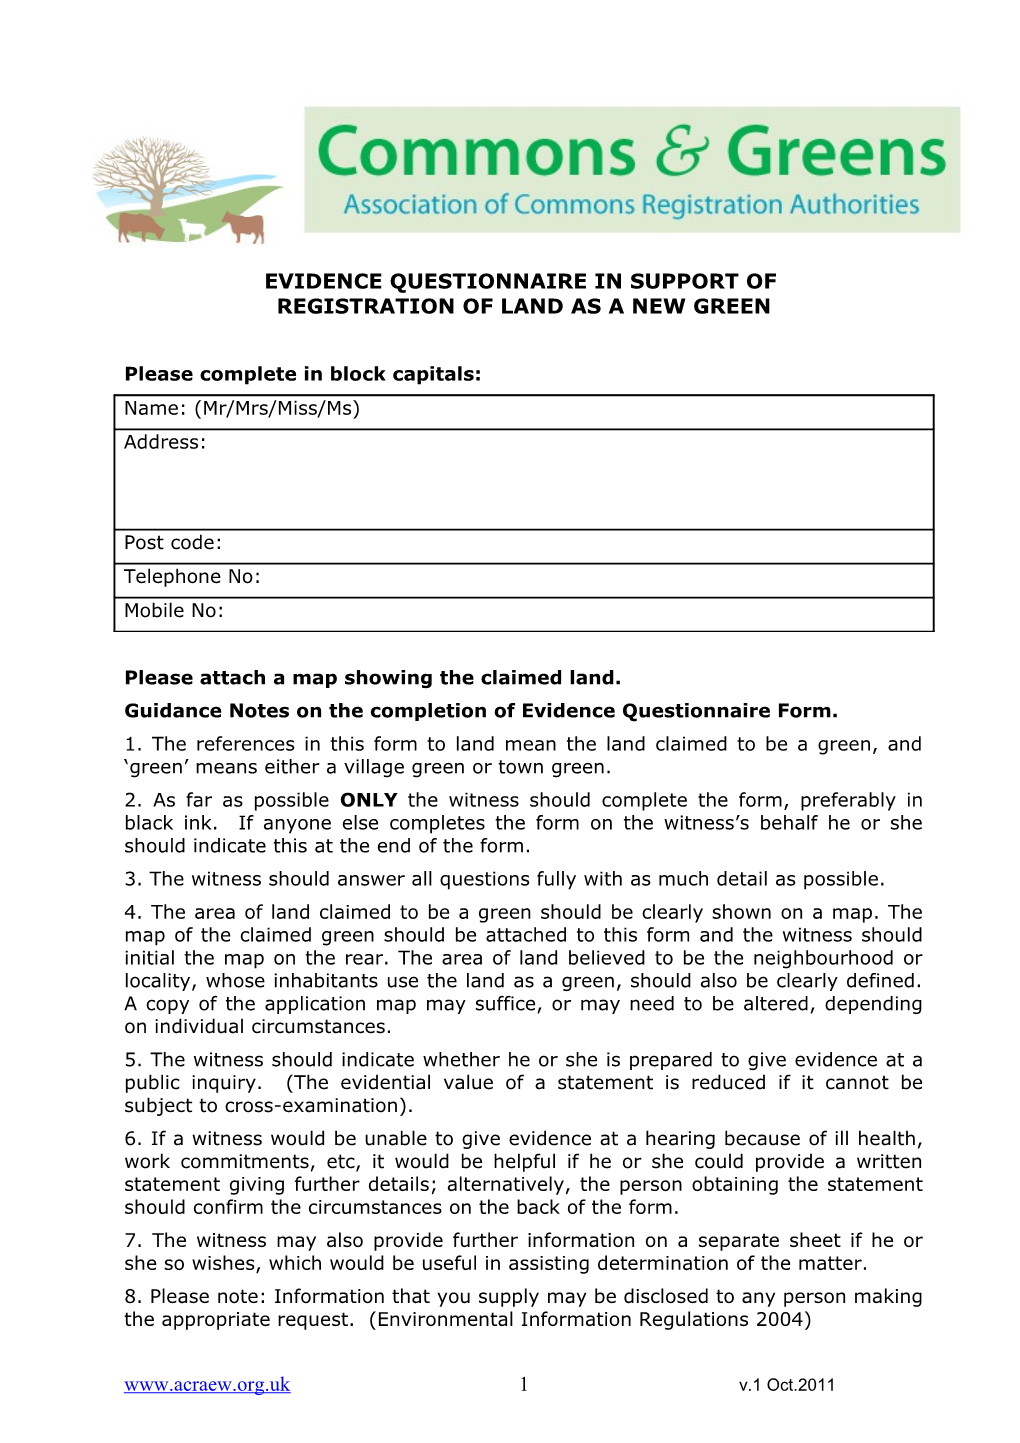 Evidence Questionnaire in Support of Registration